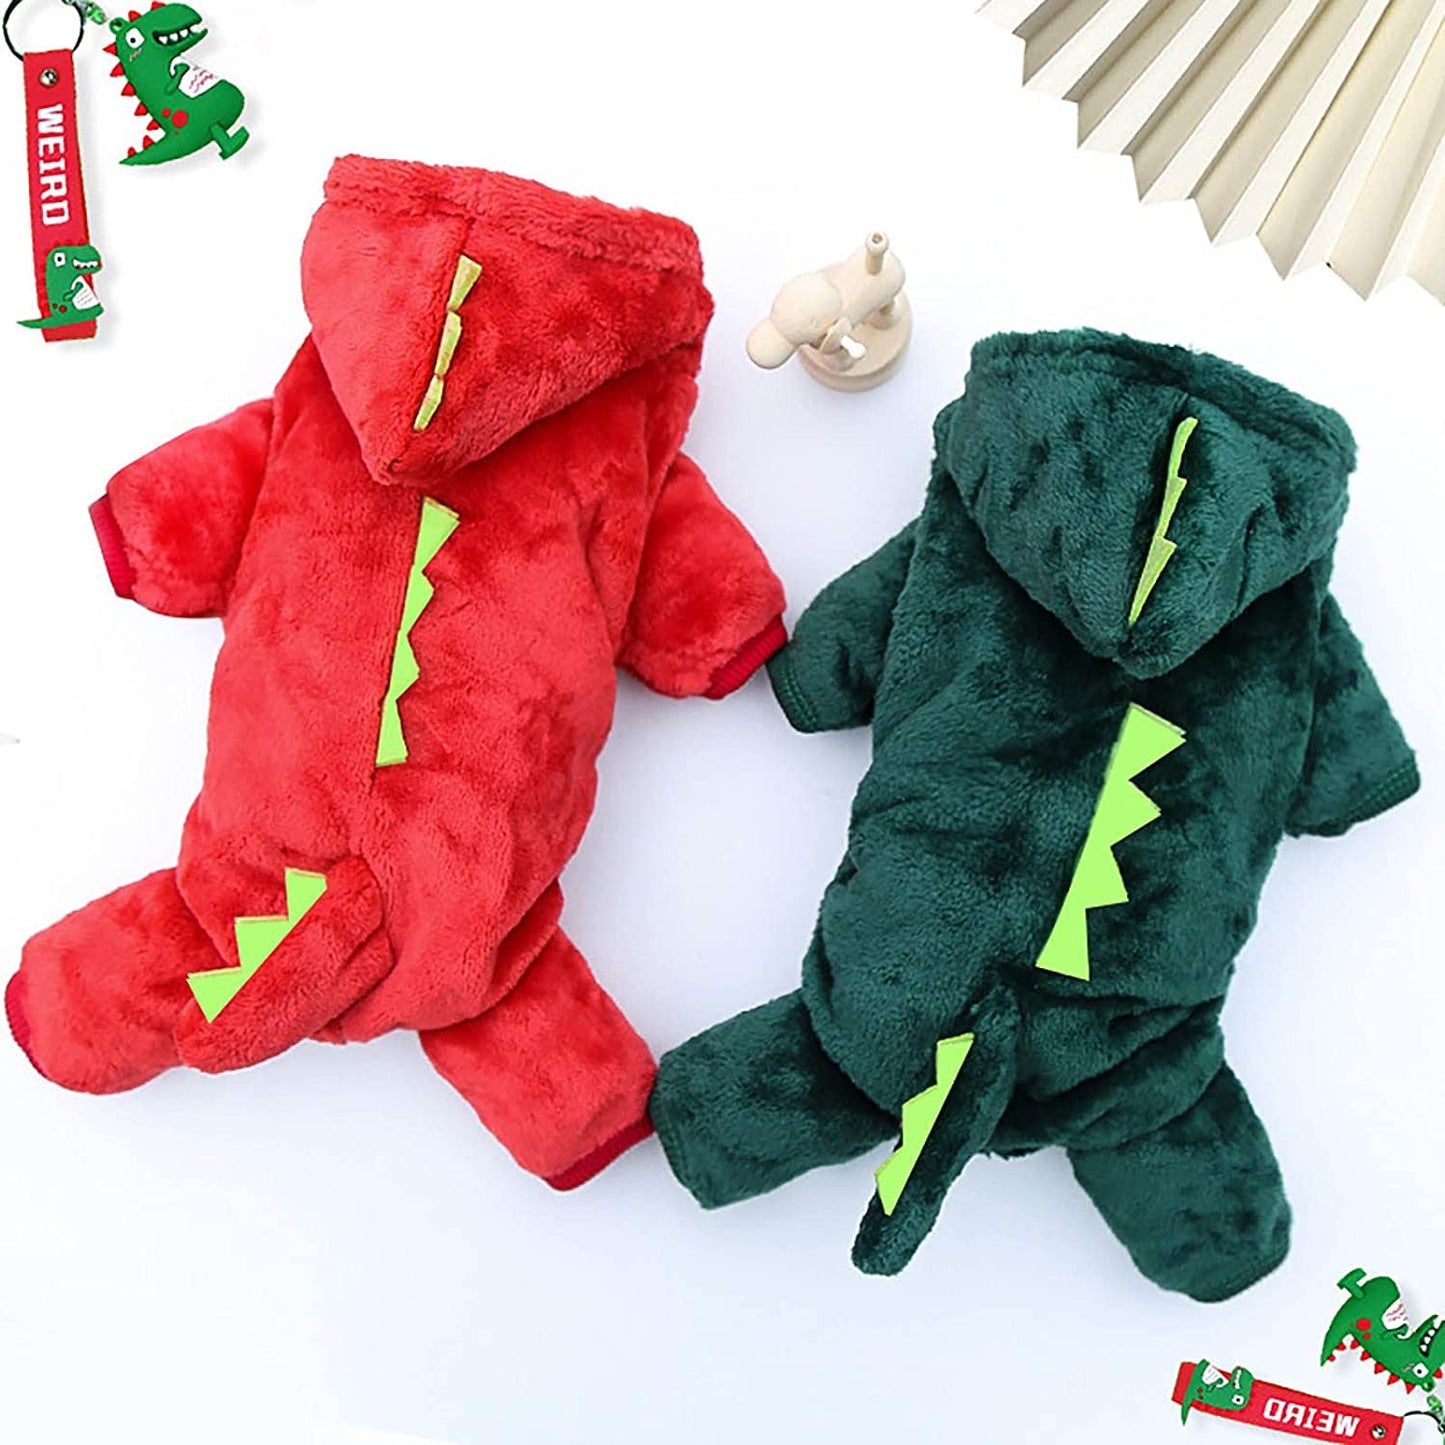 Puppy Clothes for Small Dogs Boy Rain Coat Dogs Clothes Small Pet Costume Halloween Dinosaur Costume Dog Clothing Puppy Outfits Funny Apperal